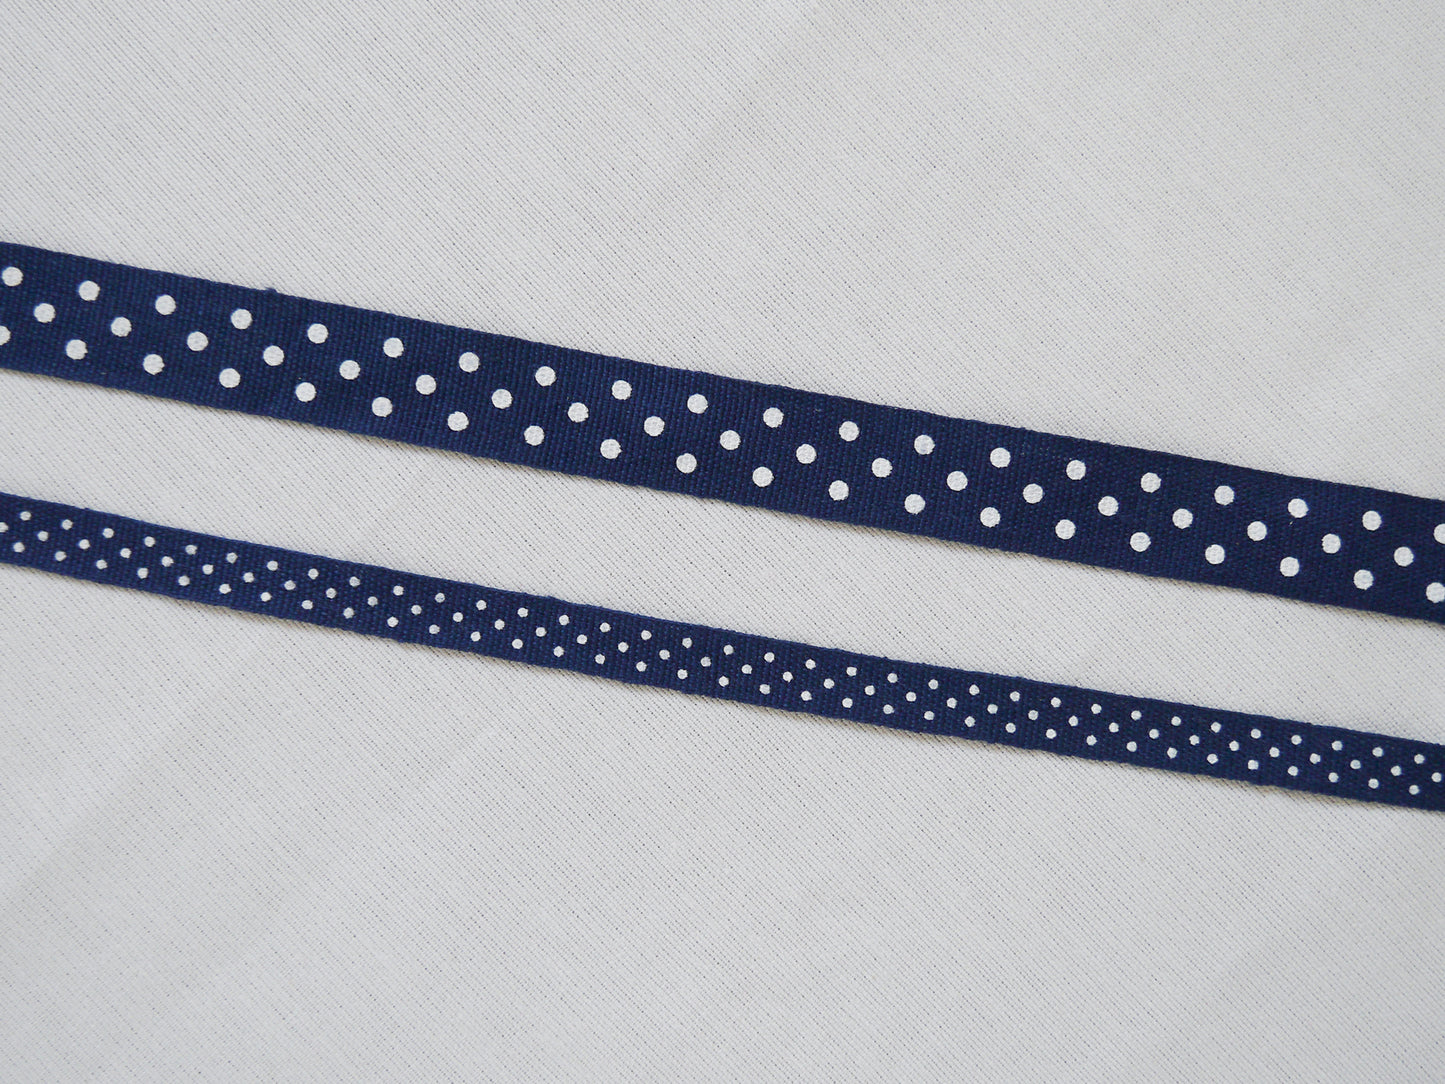 20mm Polka dots ribbon/ tape in 100% washed linen